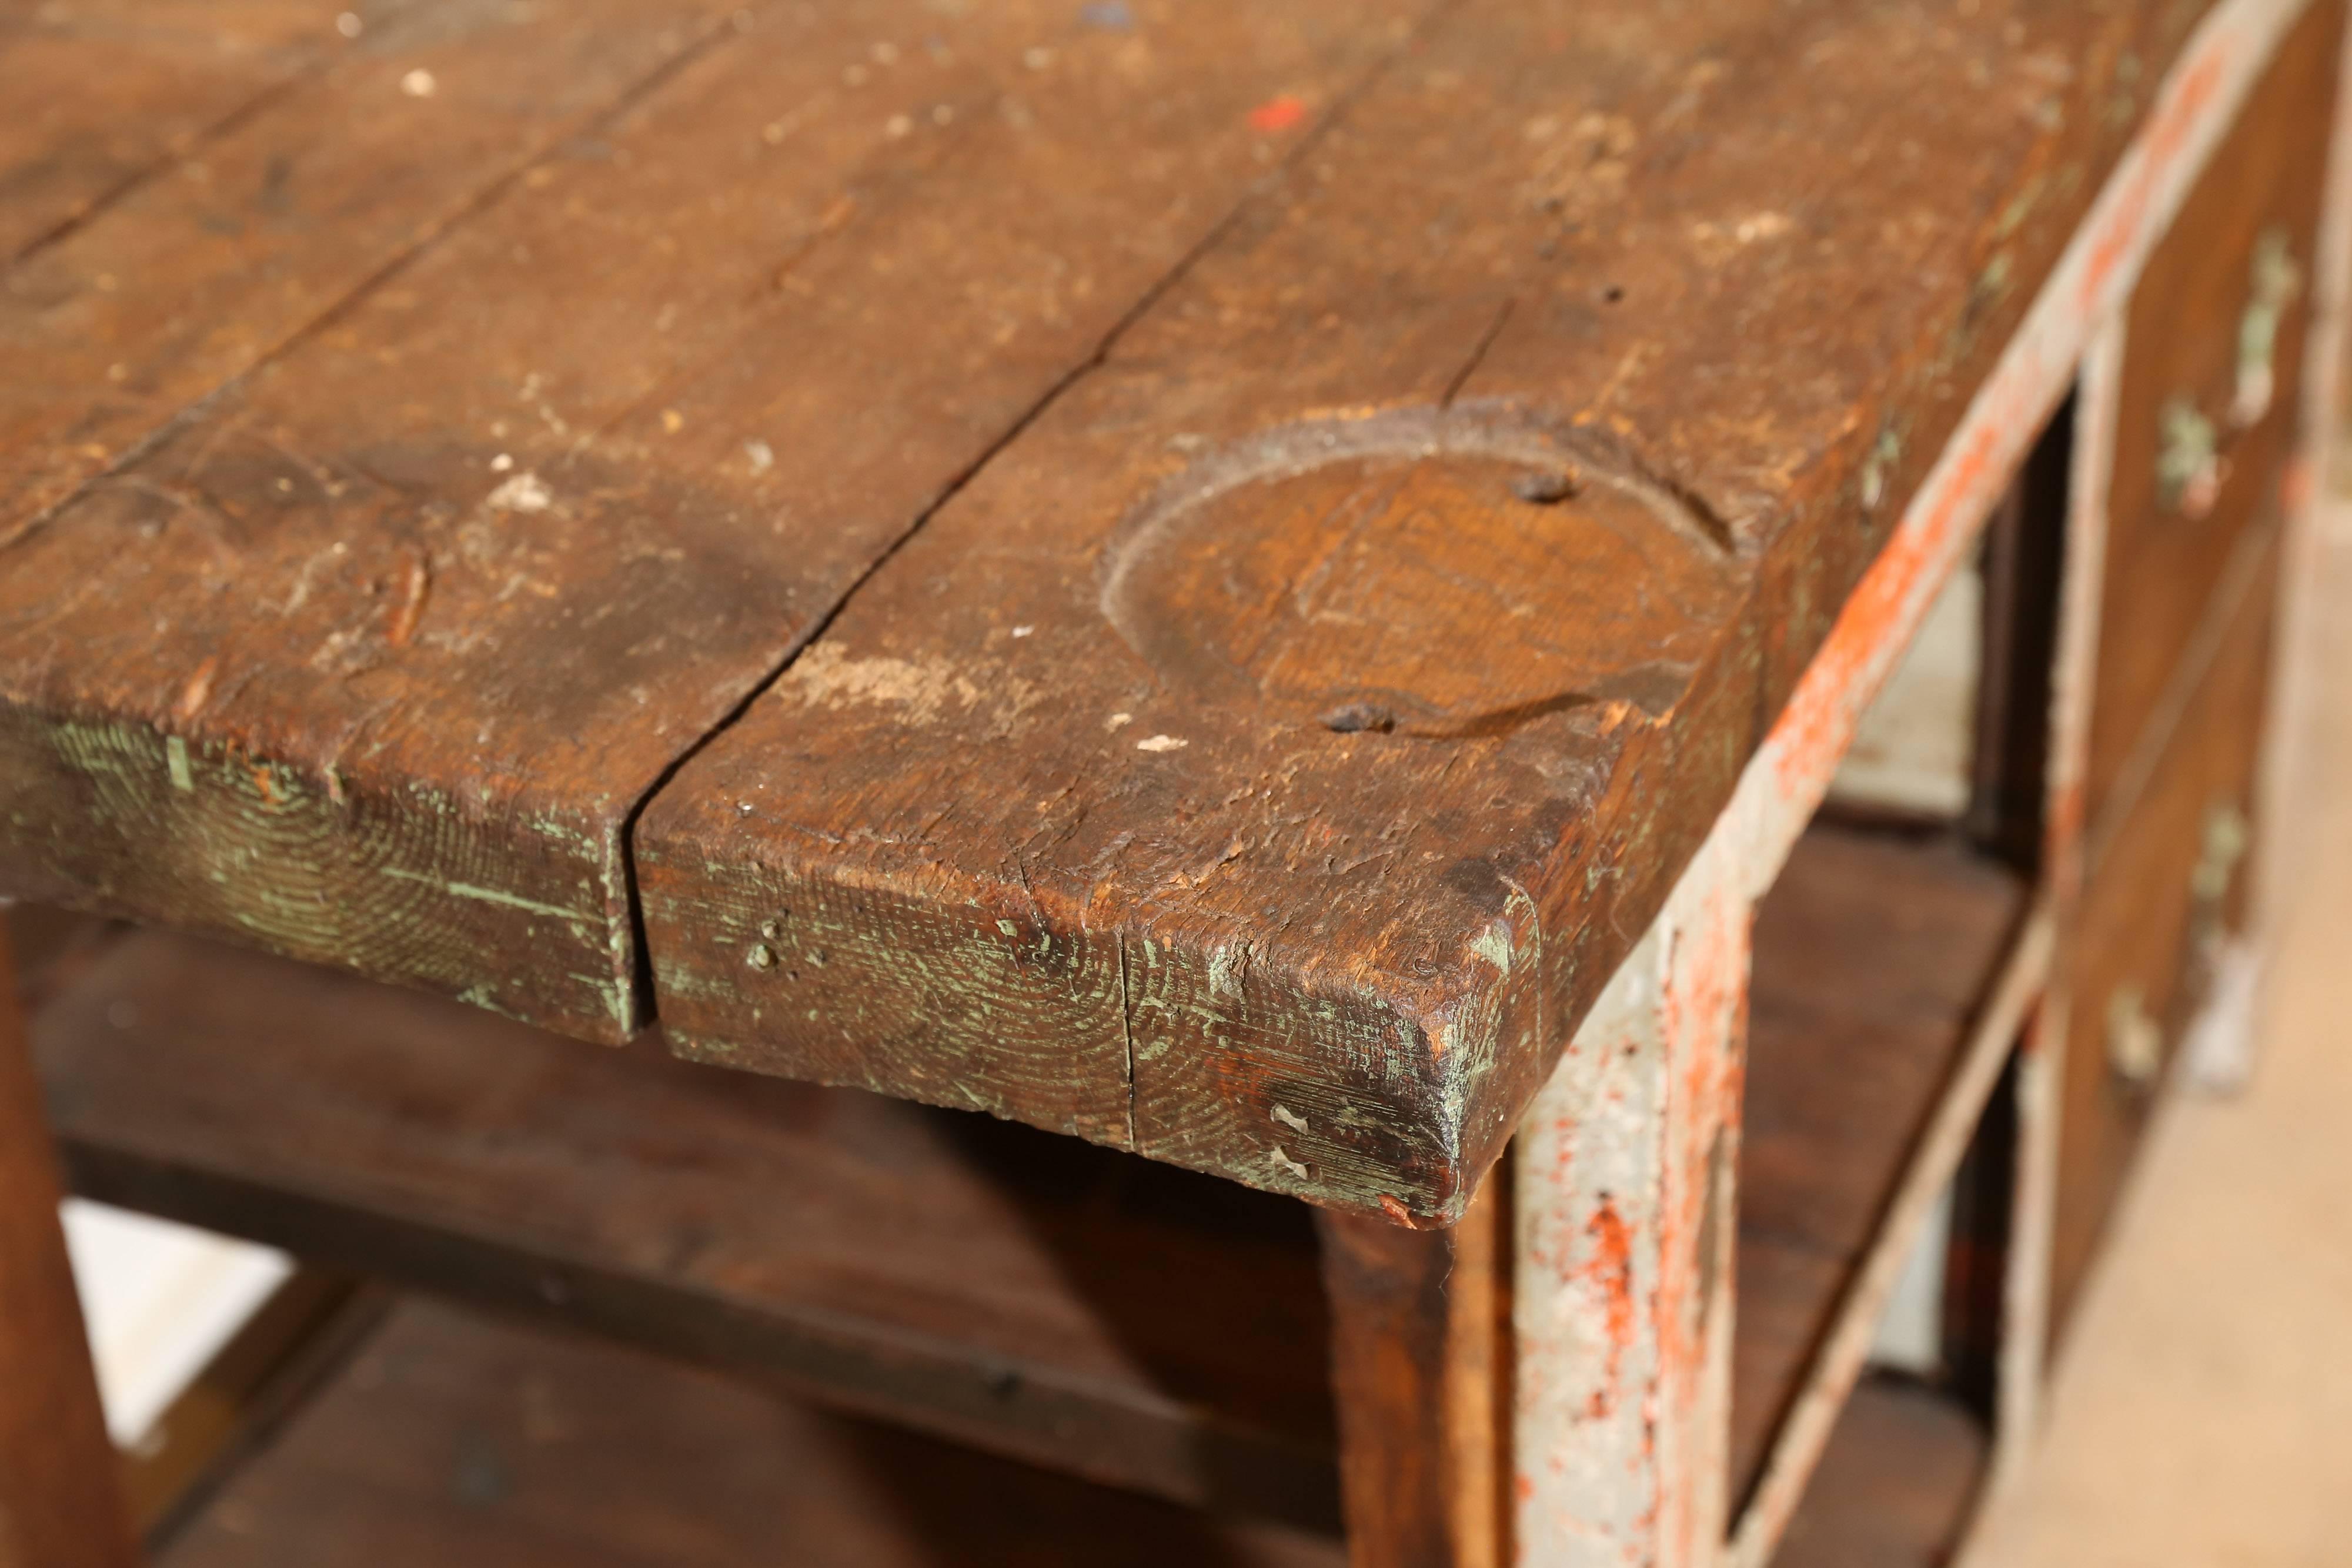 Solid as a rock and a real workhorse, this rustic work table from France tells its own story. A heavy metal frame supports a dense solid wood top. With chipped and worn grey and red paint, a space notched out for a vice, wooden shelves and two deep